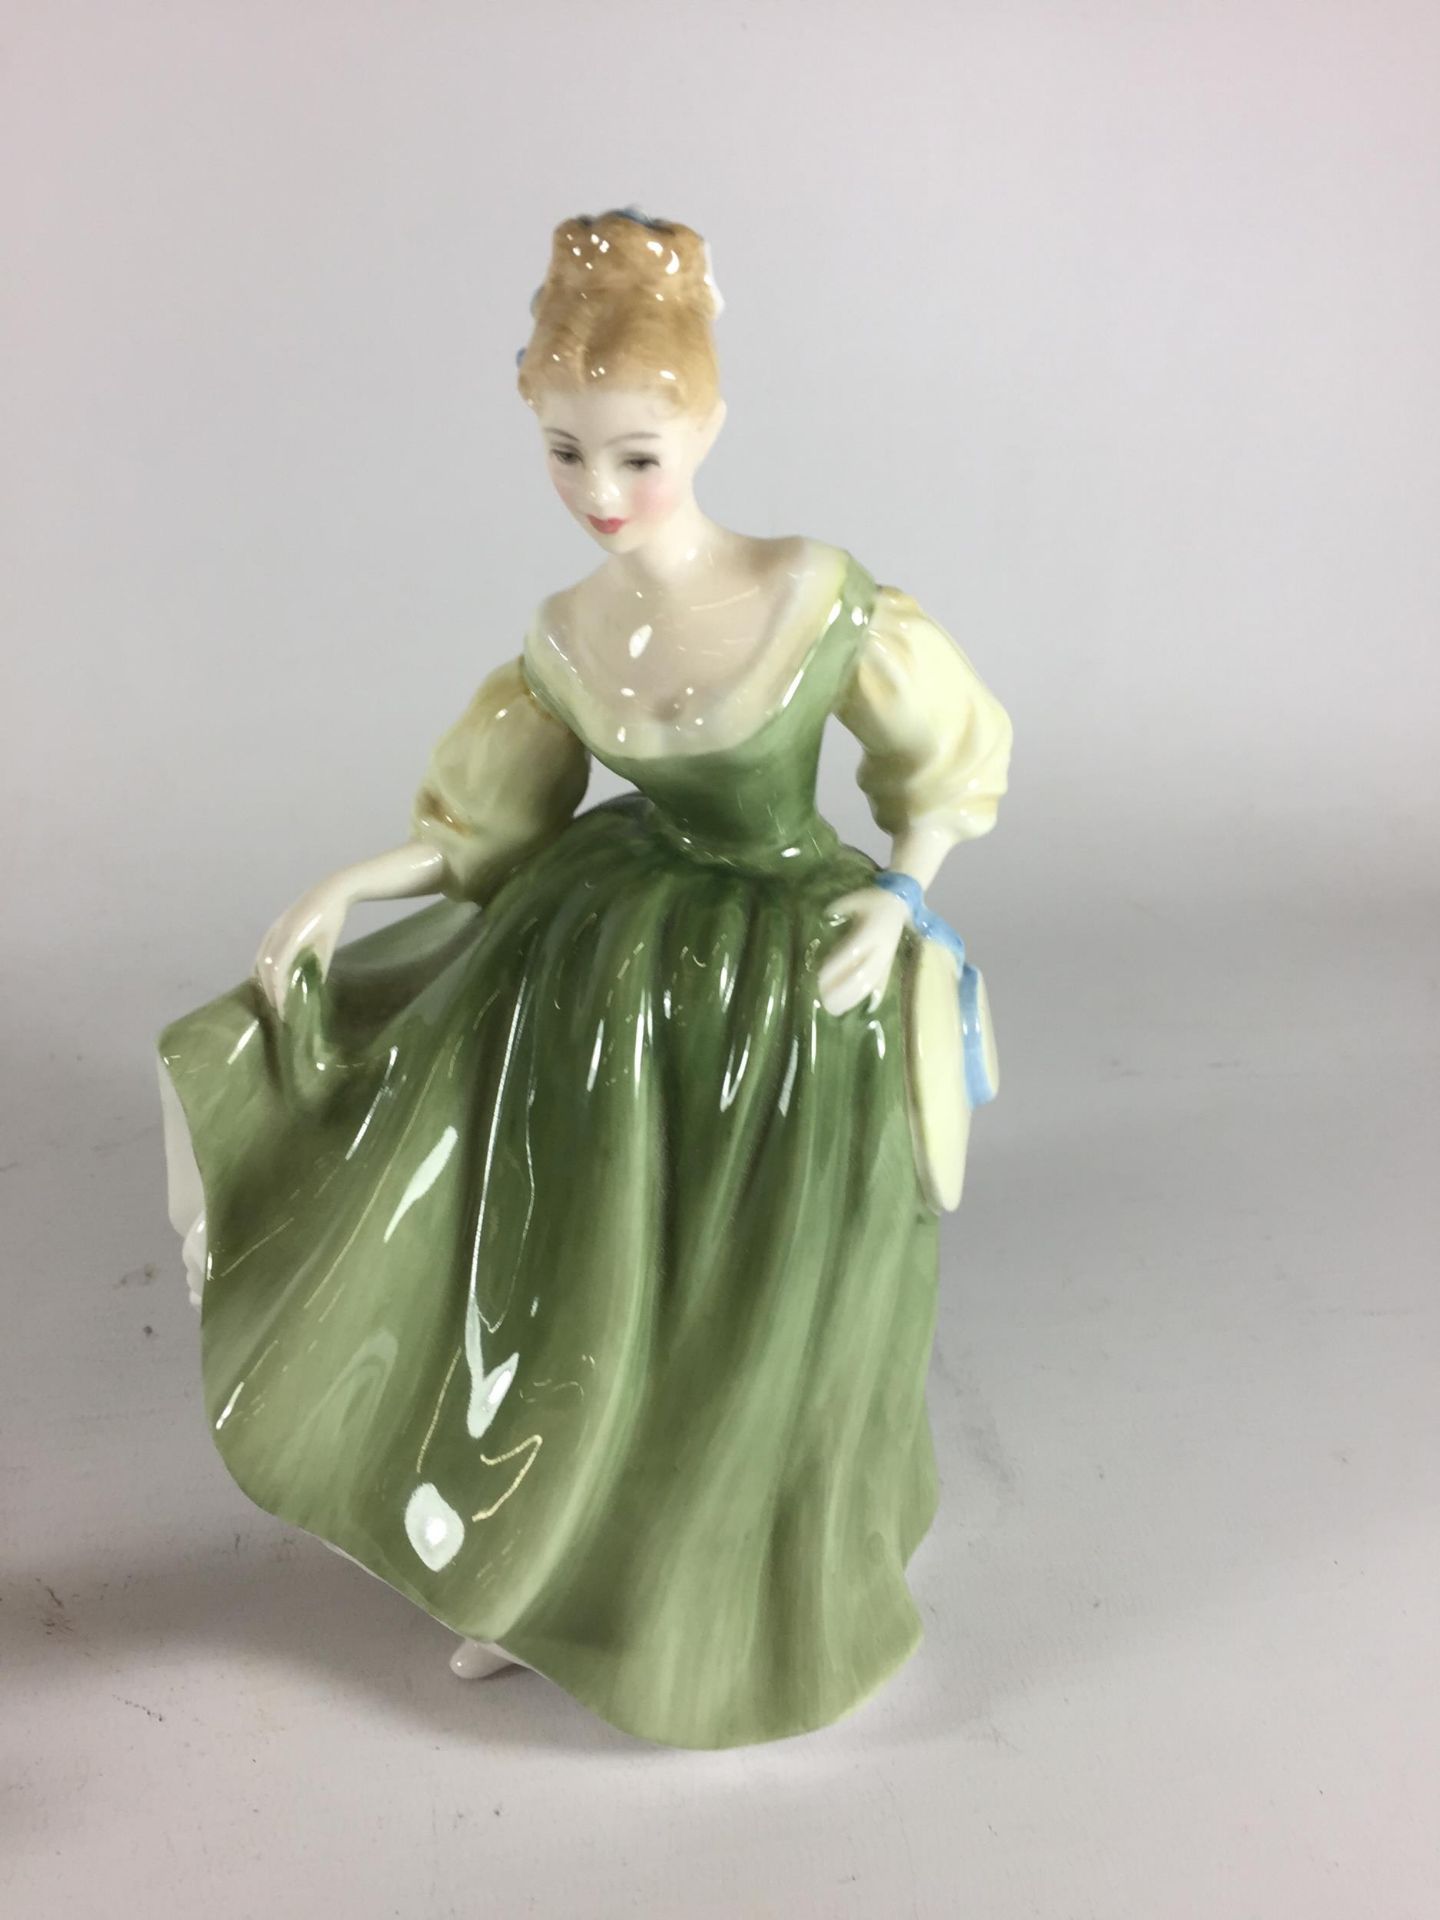 TWO ROYAL DOULTON LADY FIGURES - FAIR LADY HN2193 & MARY HAD A LITTLE LAMB HN2048 - Image 2 of 4